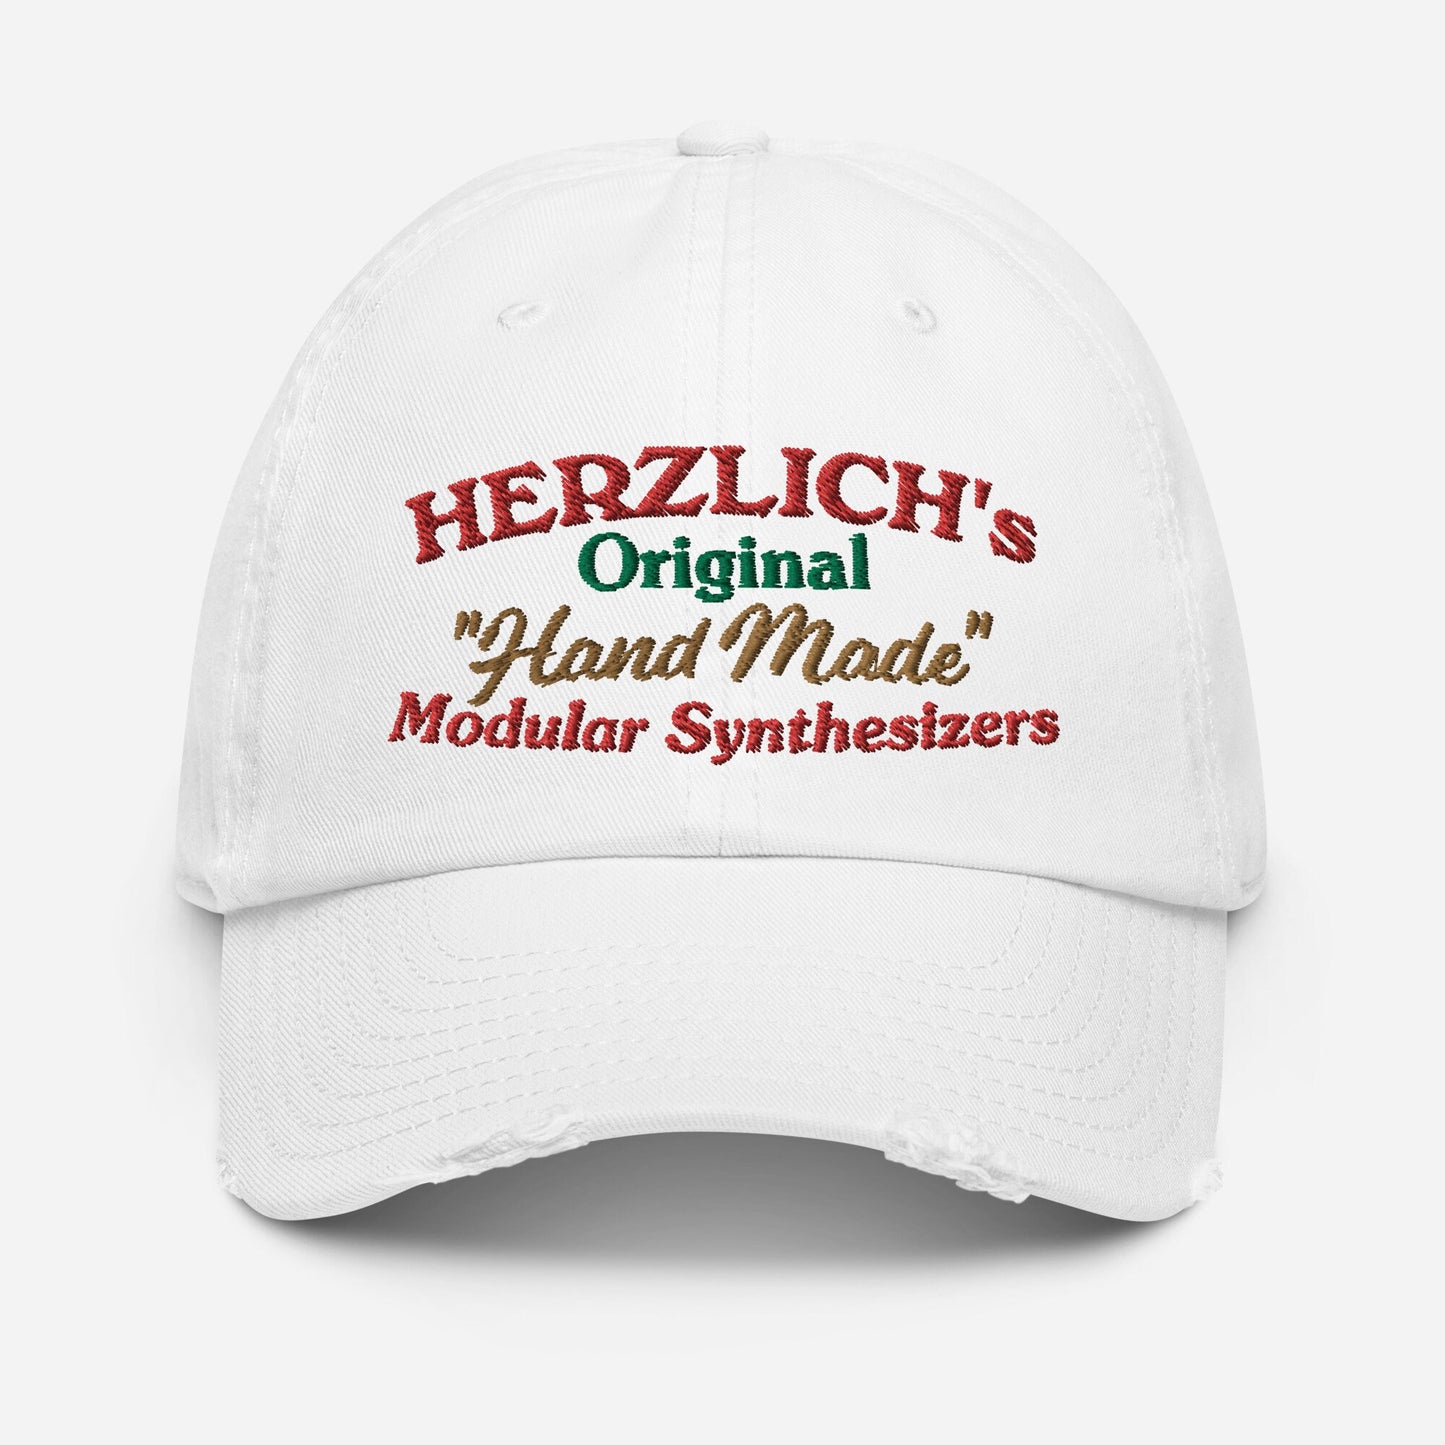 Herzlich Pizza Delivery Head Attire for Low-key Brand Appreciation and Exotic Modular-inspired Roleplay